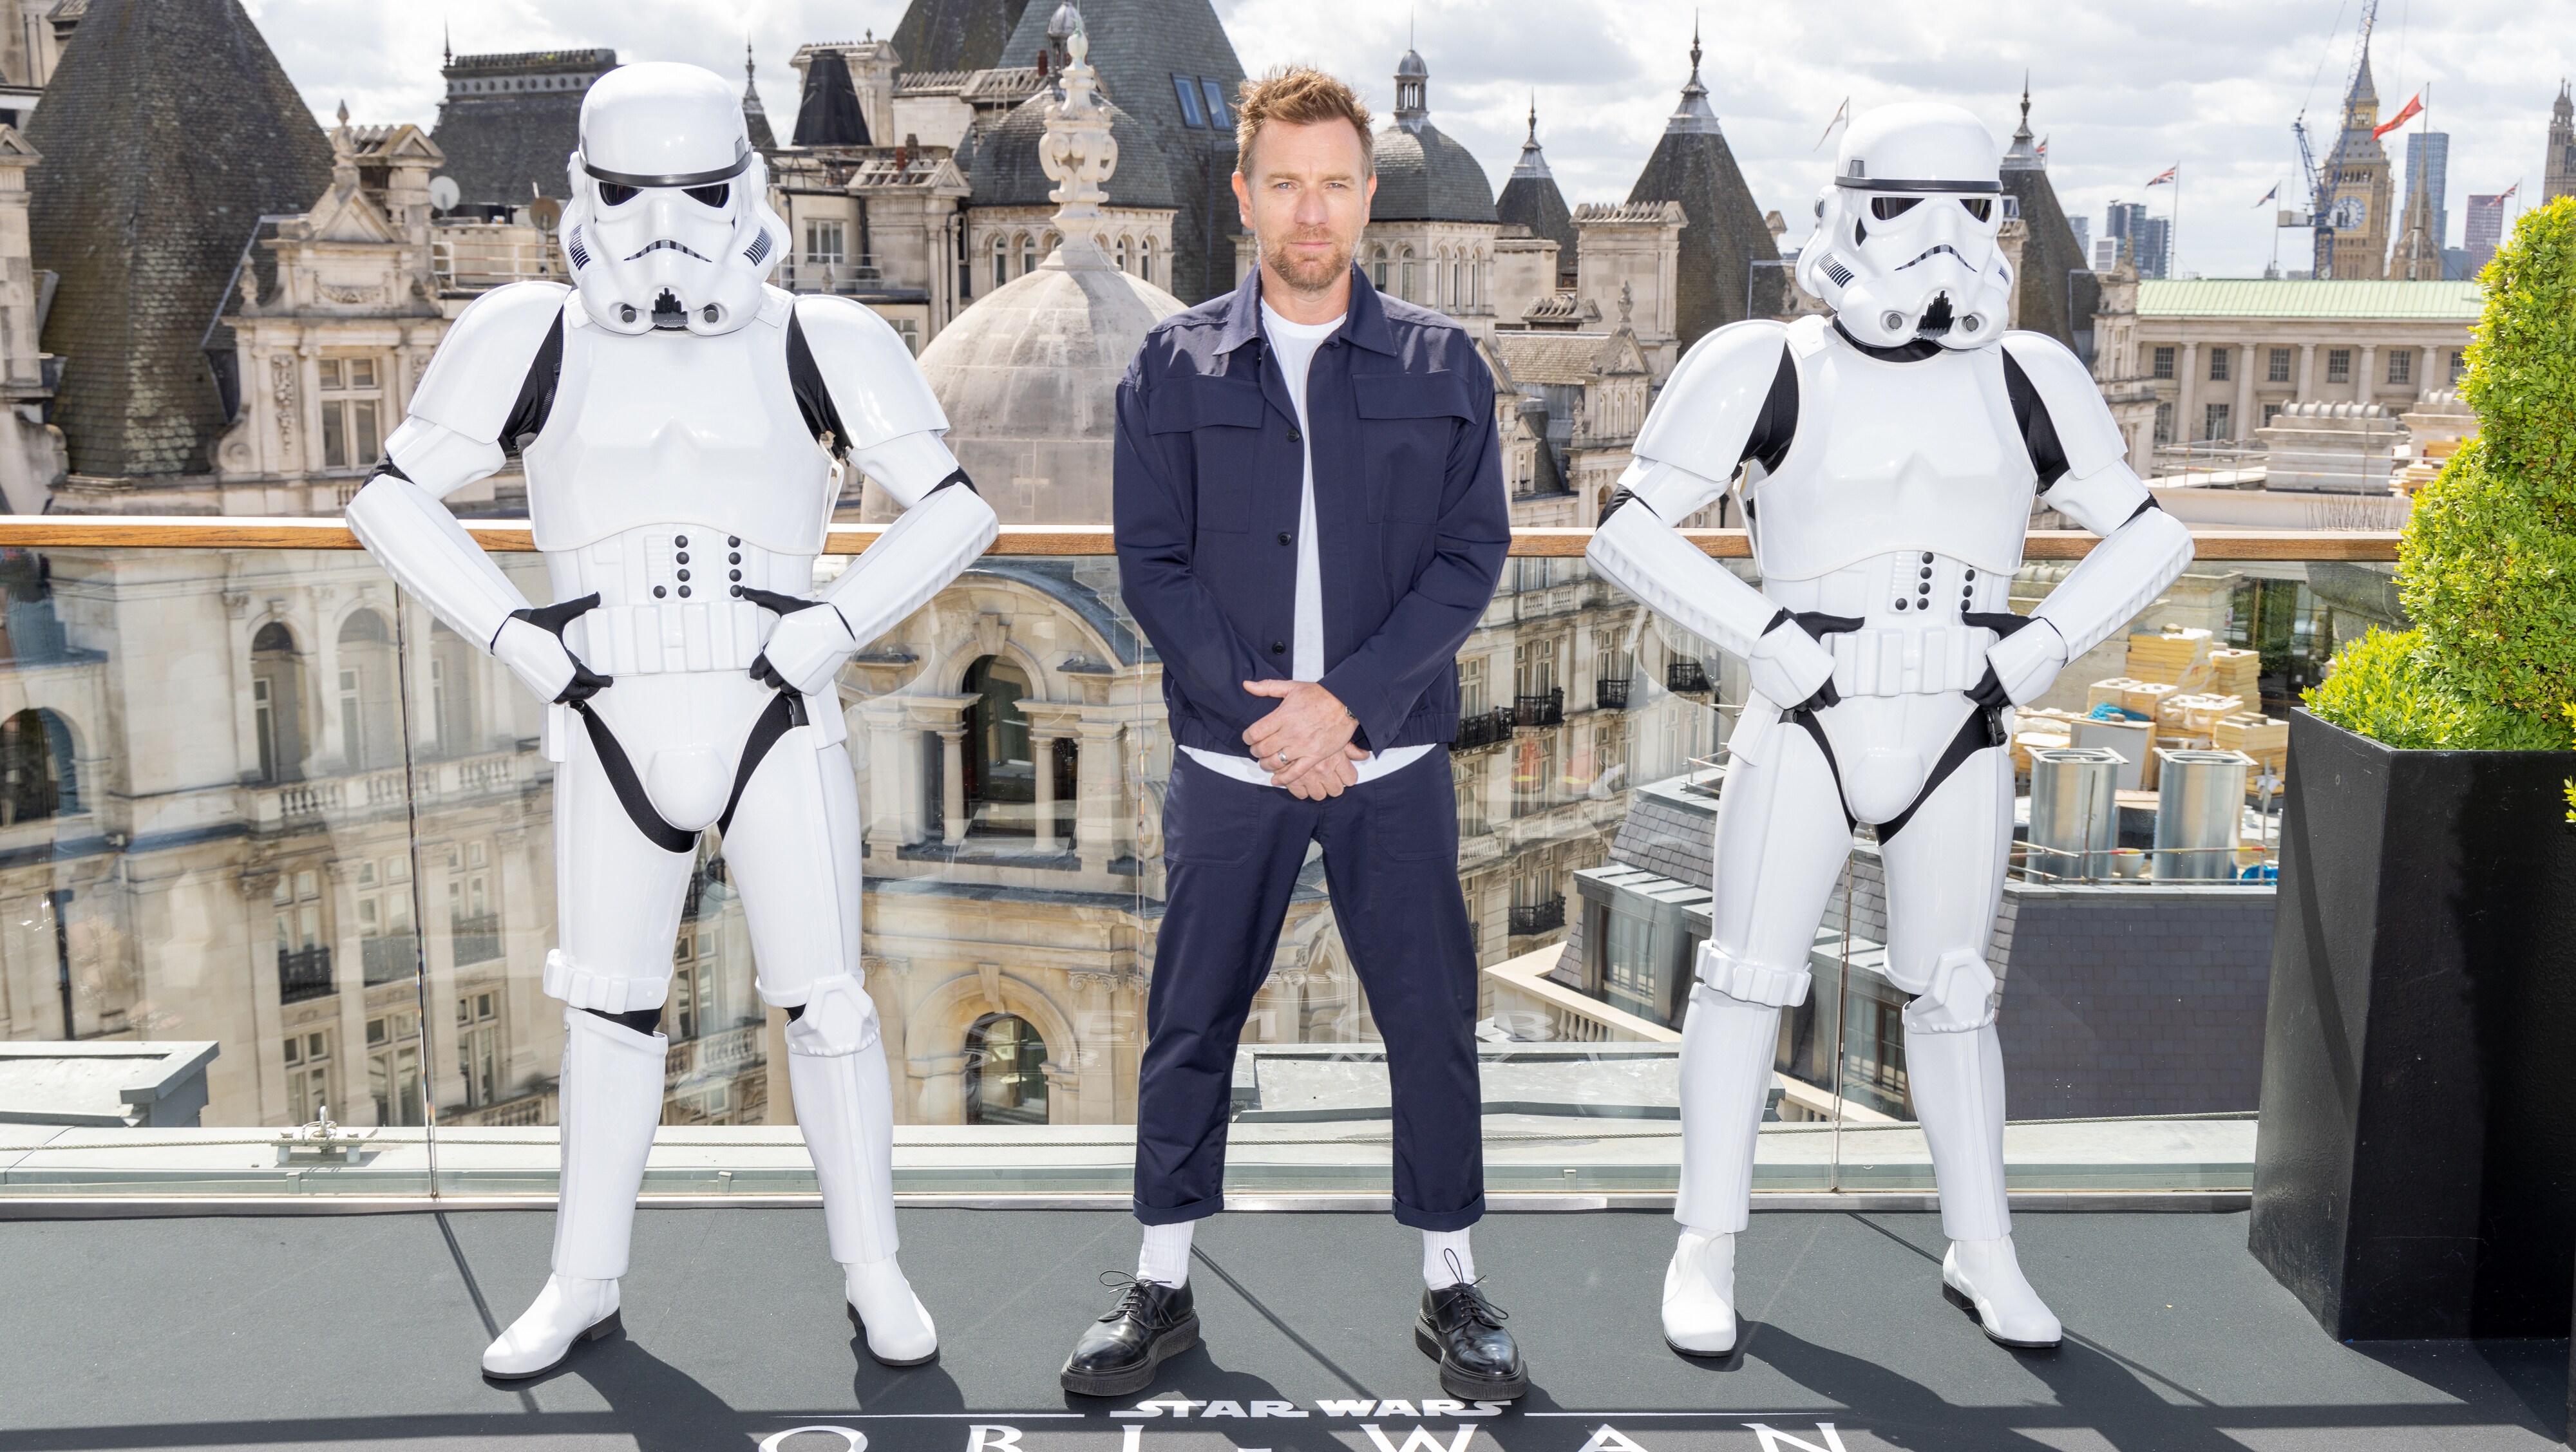 LONDON, ENGLAND - MAY 12:  Ewan McGregor attends the photocall for the new Disney+ limited series "Obi Wan Kenobi" at the Corinthia Hotel on May 12, 2022 in London, England. Obi-Wan Kenobi will be exclusively available on Disney+ from May 27. (Photo by StillMoving.net for Disney)